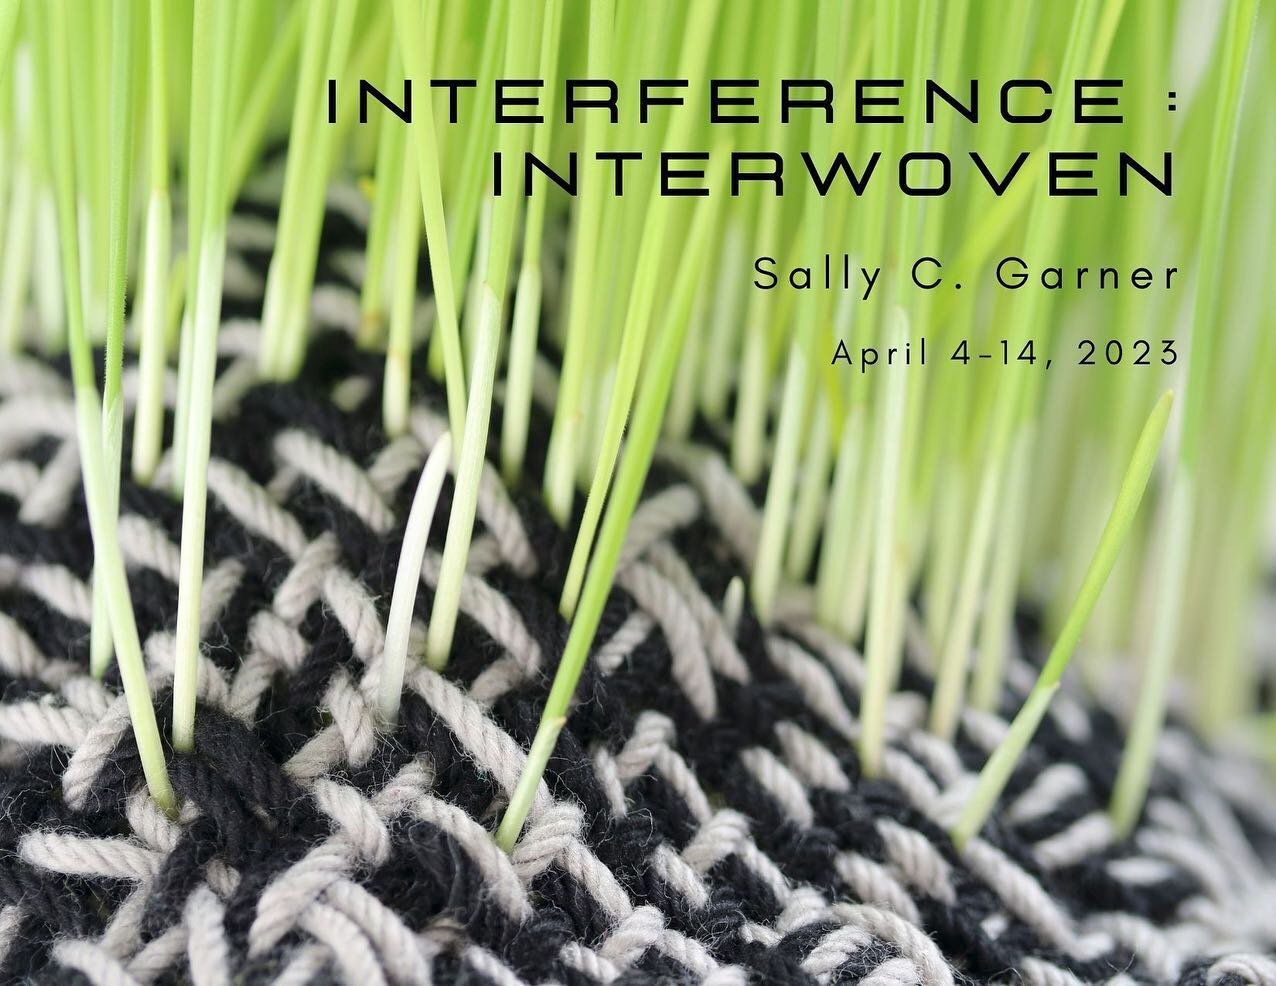 Interference : Interwoven, my MFA thesis show, will be on view at the ArtsXchange in the Jack Sinclair Gallery from 4/4-4/14. The reception will take place Friday, 4/7, 6-9pm. Then, the following Sunday I will lead an Art Hike to view the site-specif